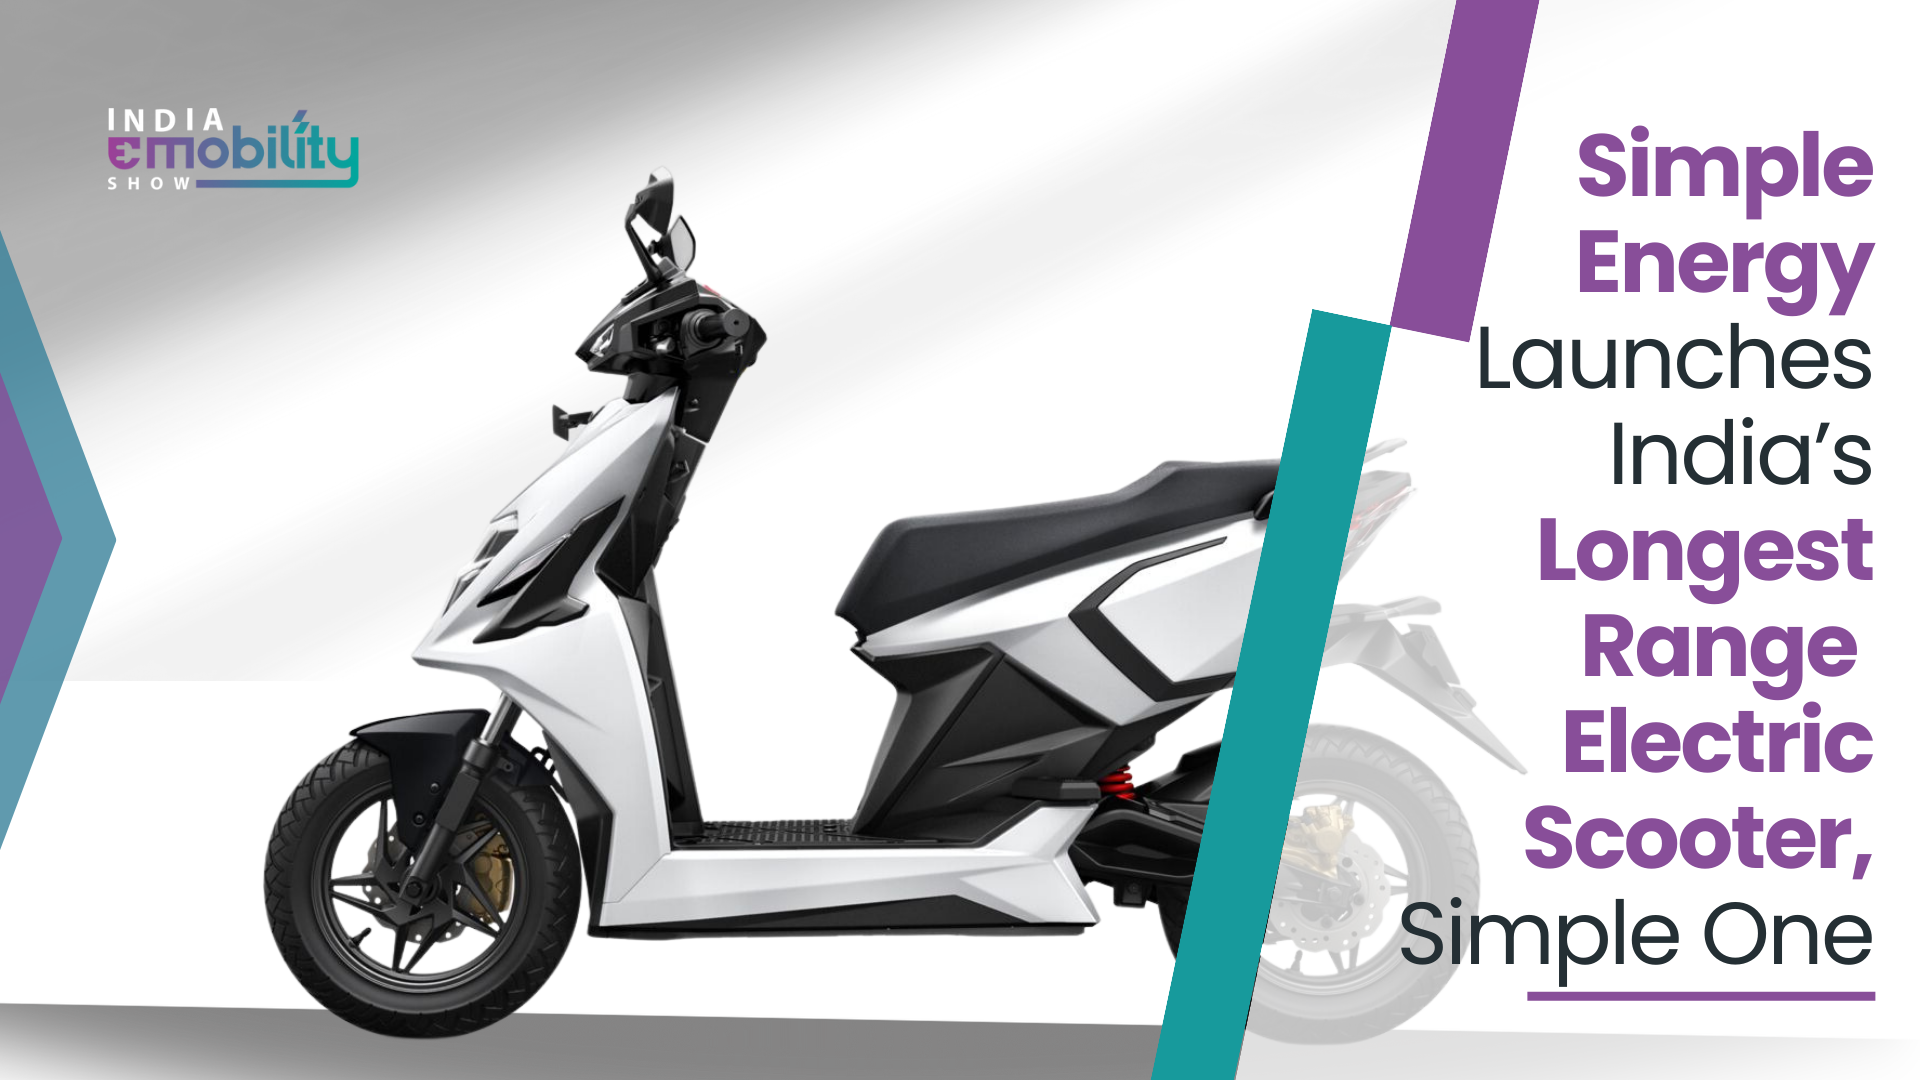 Simple Energy Launches India’s Longest Range Electric Scooter, Simple One